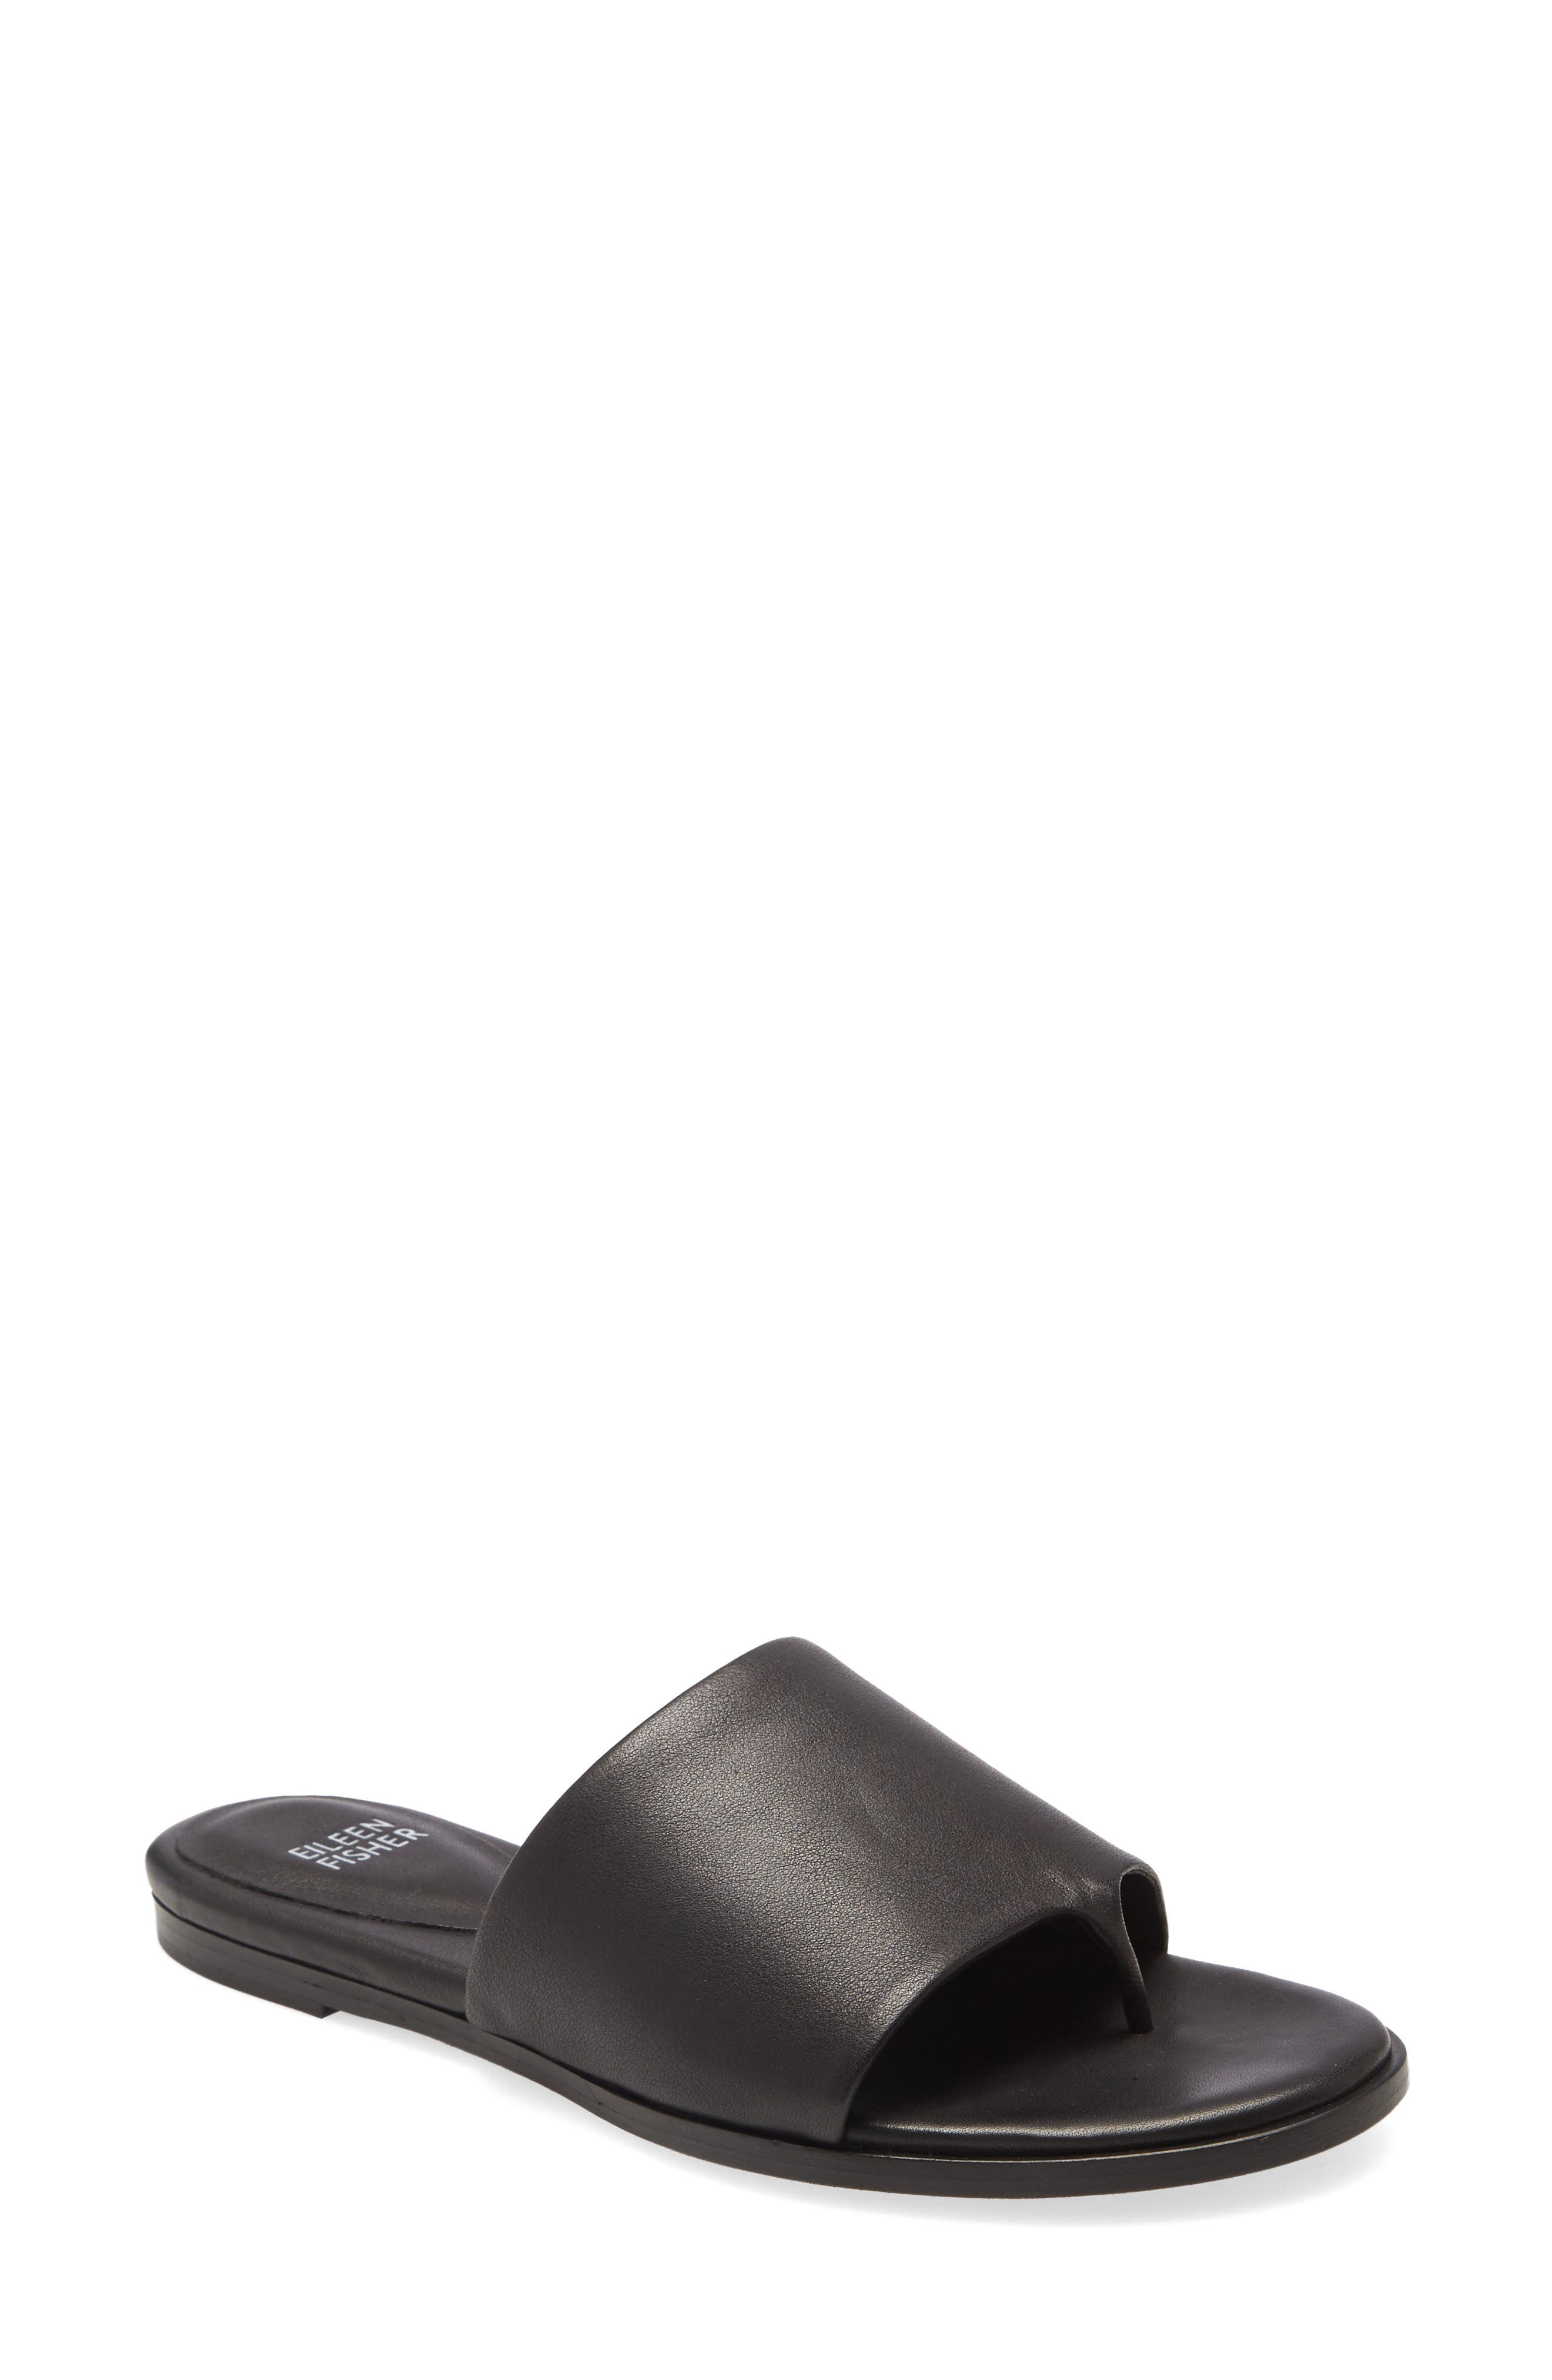 eileen fisher mules